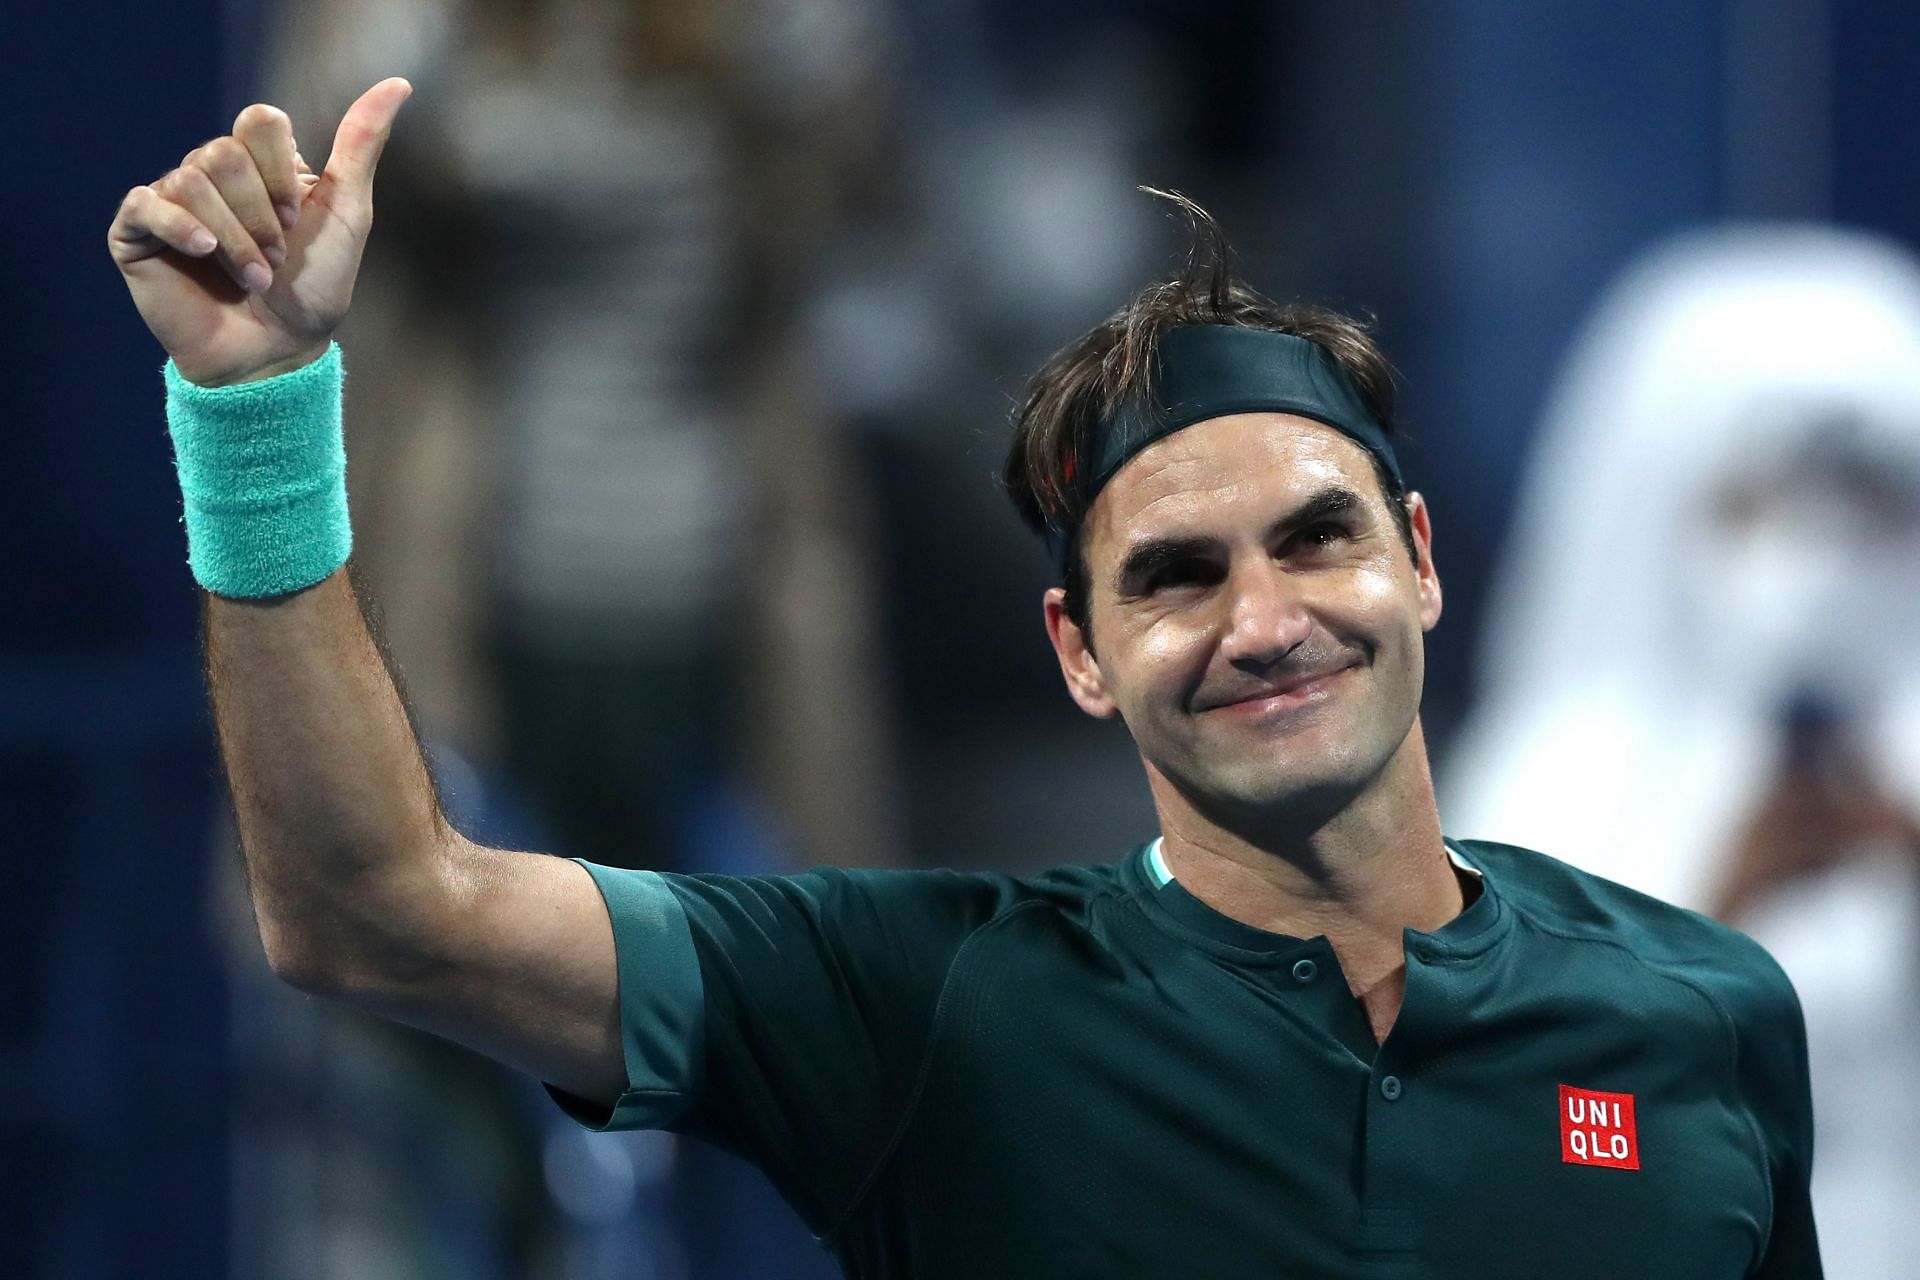 Roger Federer provided an update on his training routine in his latest Instagram post